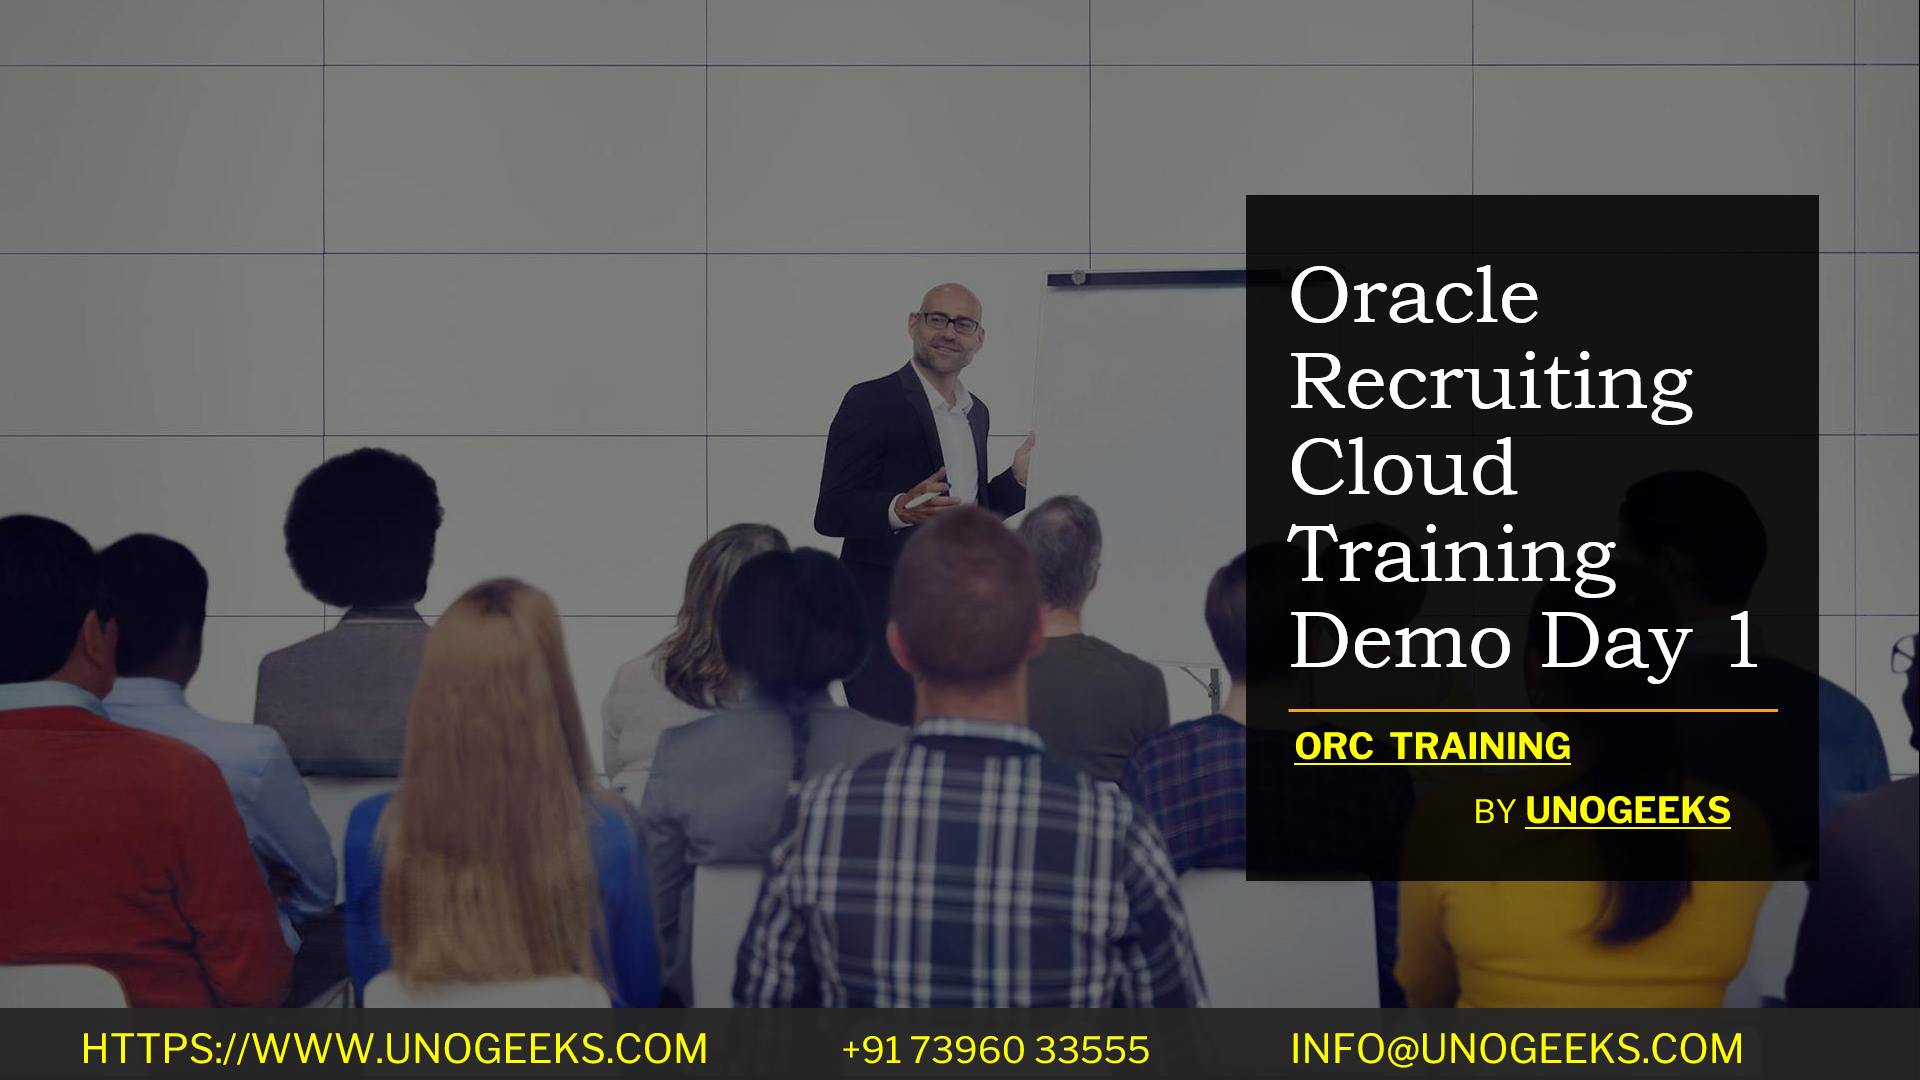 Oracle Recruiting Cloud Training Demo Day 1